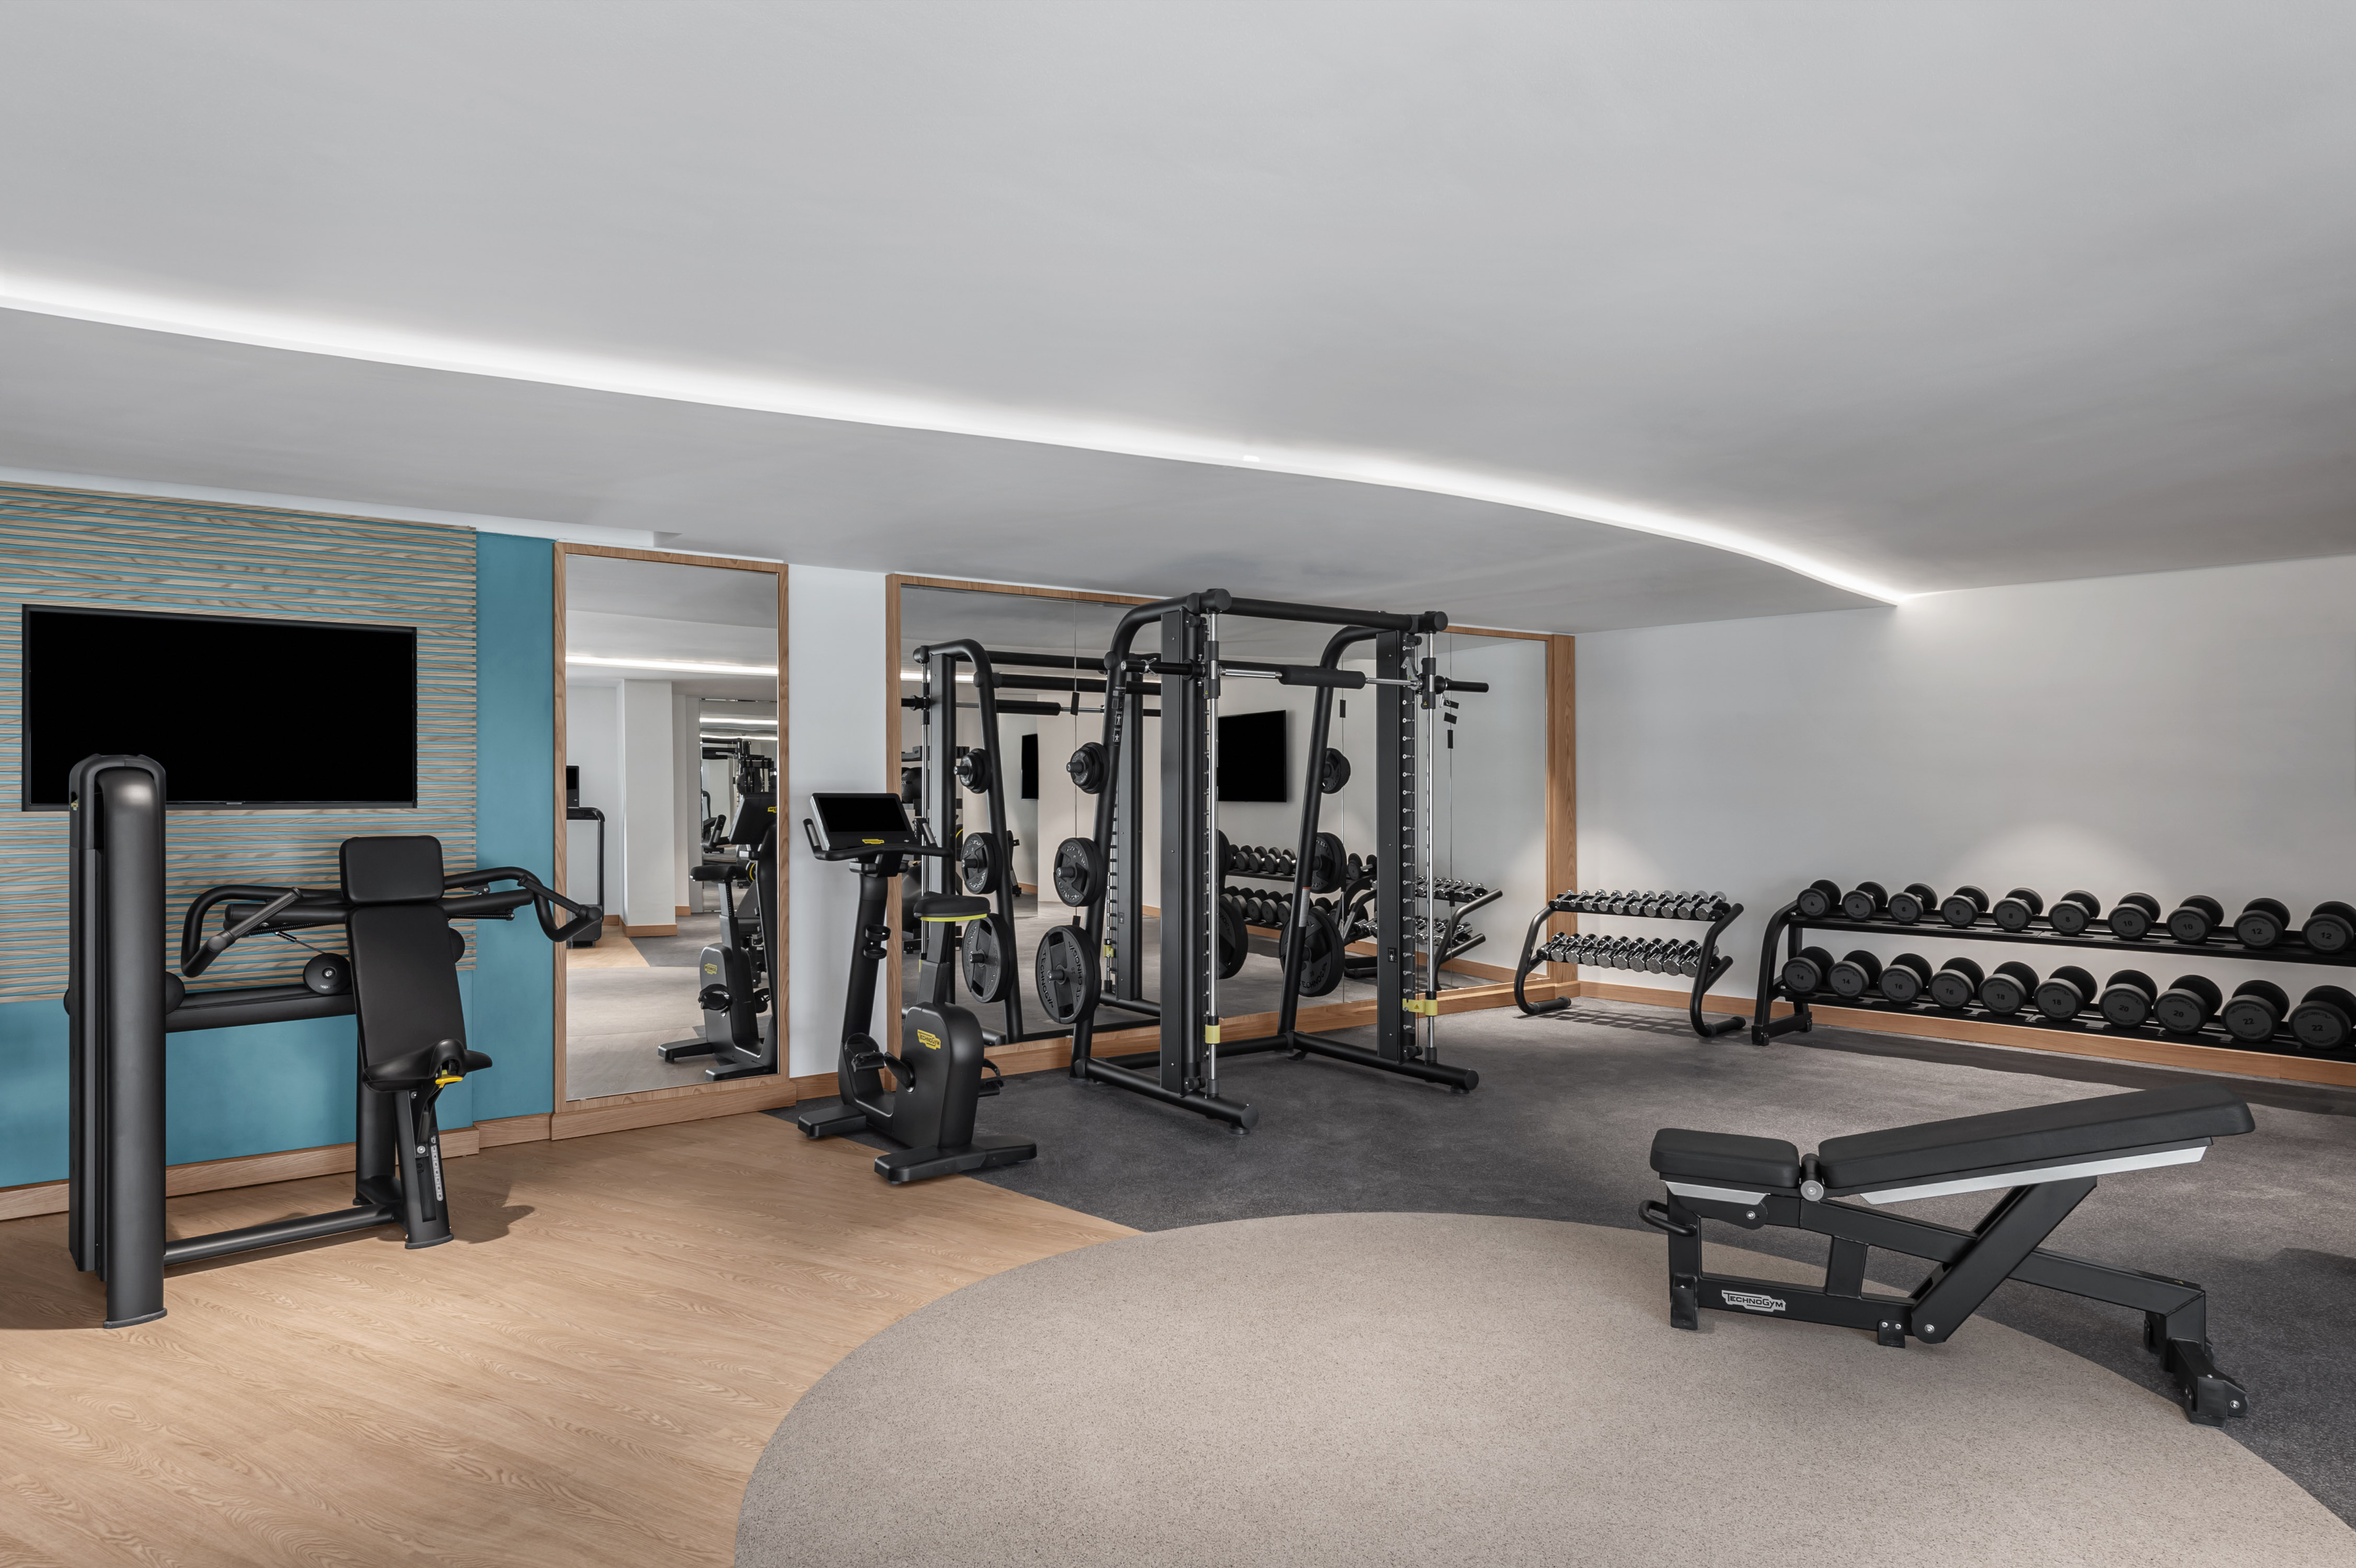 Fitness Center with Weights HDTV and other Modern Equipment 